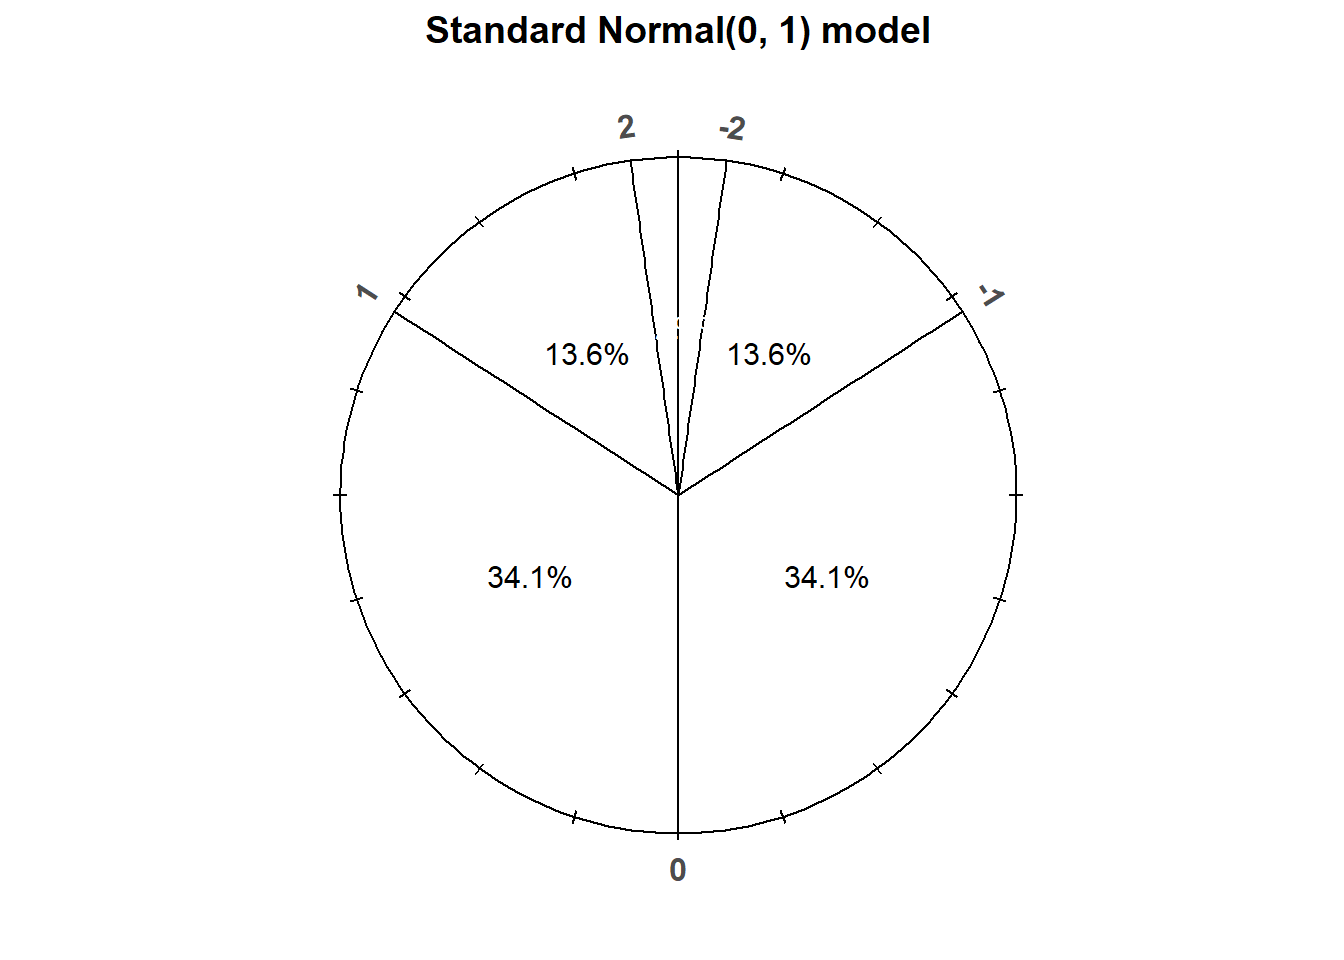 A “standard” Normal(0, 1) spinner. The same spinner is displayed on both sides, with different features highlighted on the left and right. Only selected rounded values are displayed, but in the idealized model the spinner is infinitely precise so that any real number is a possible outcome. Notice that the values on the axis are not evenly spaced.